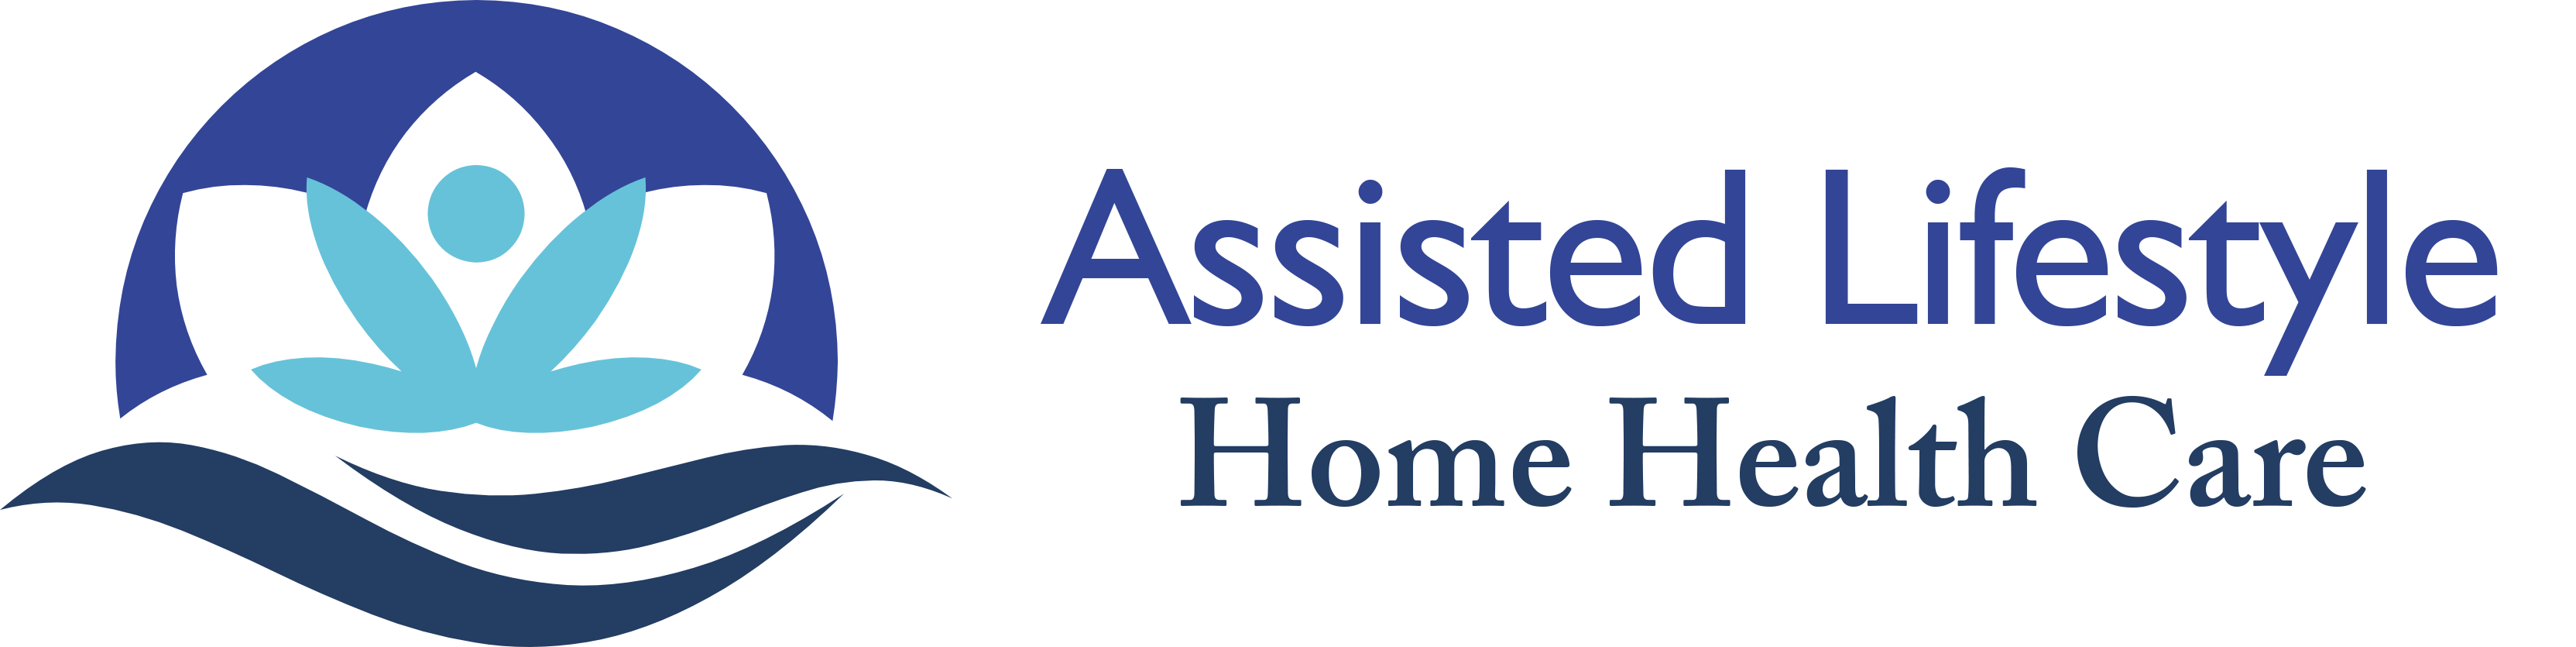 Assisted Lifestyle Home Care